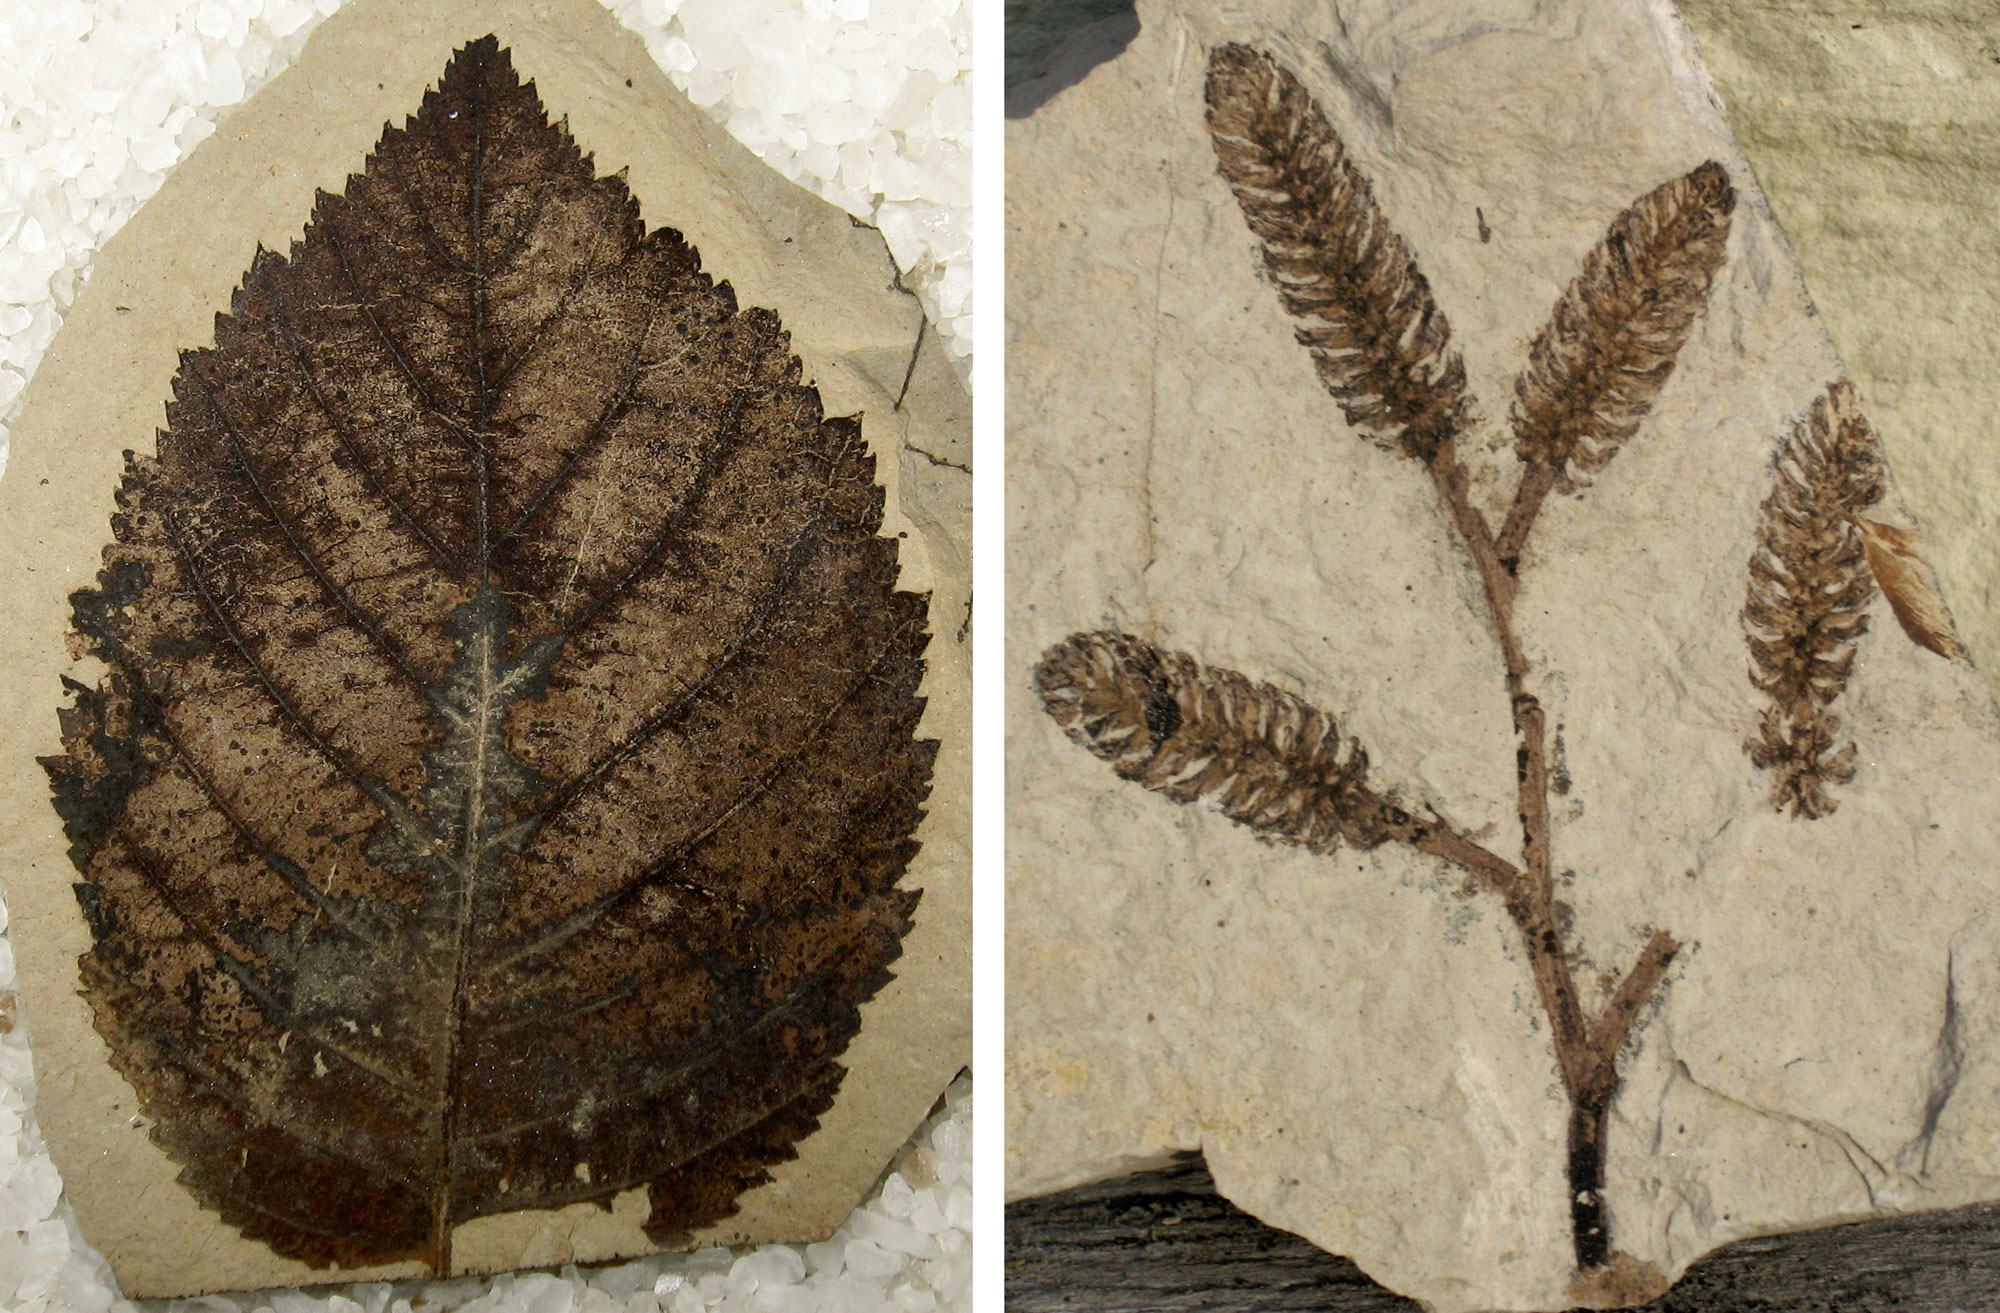 2-panel image of photographs showing birch family fossils from the Eocene of Republic, Washington. Panel 1. A birch leaf. The leaf is simple with a toothed margin and pinnate venation. Panel 2. A branch bearing alternately arranged branches, each ending in a so-called "cone." The cones are really groups of flowers or fruits.